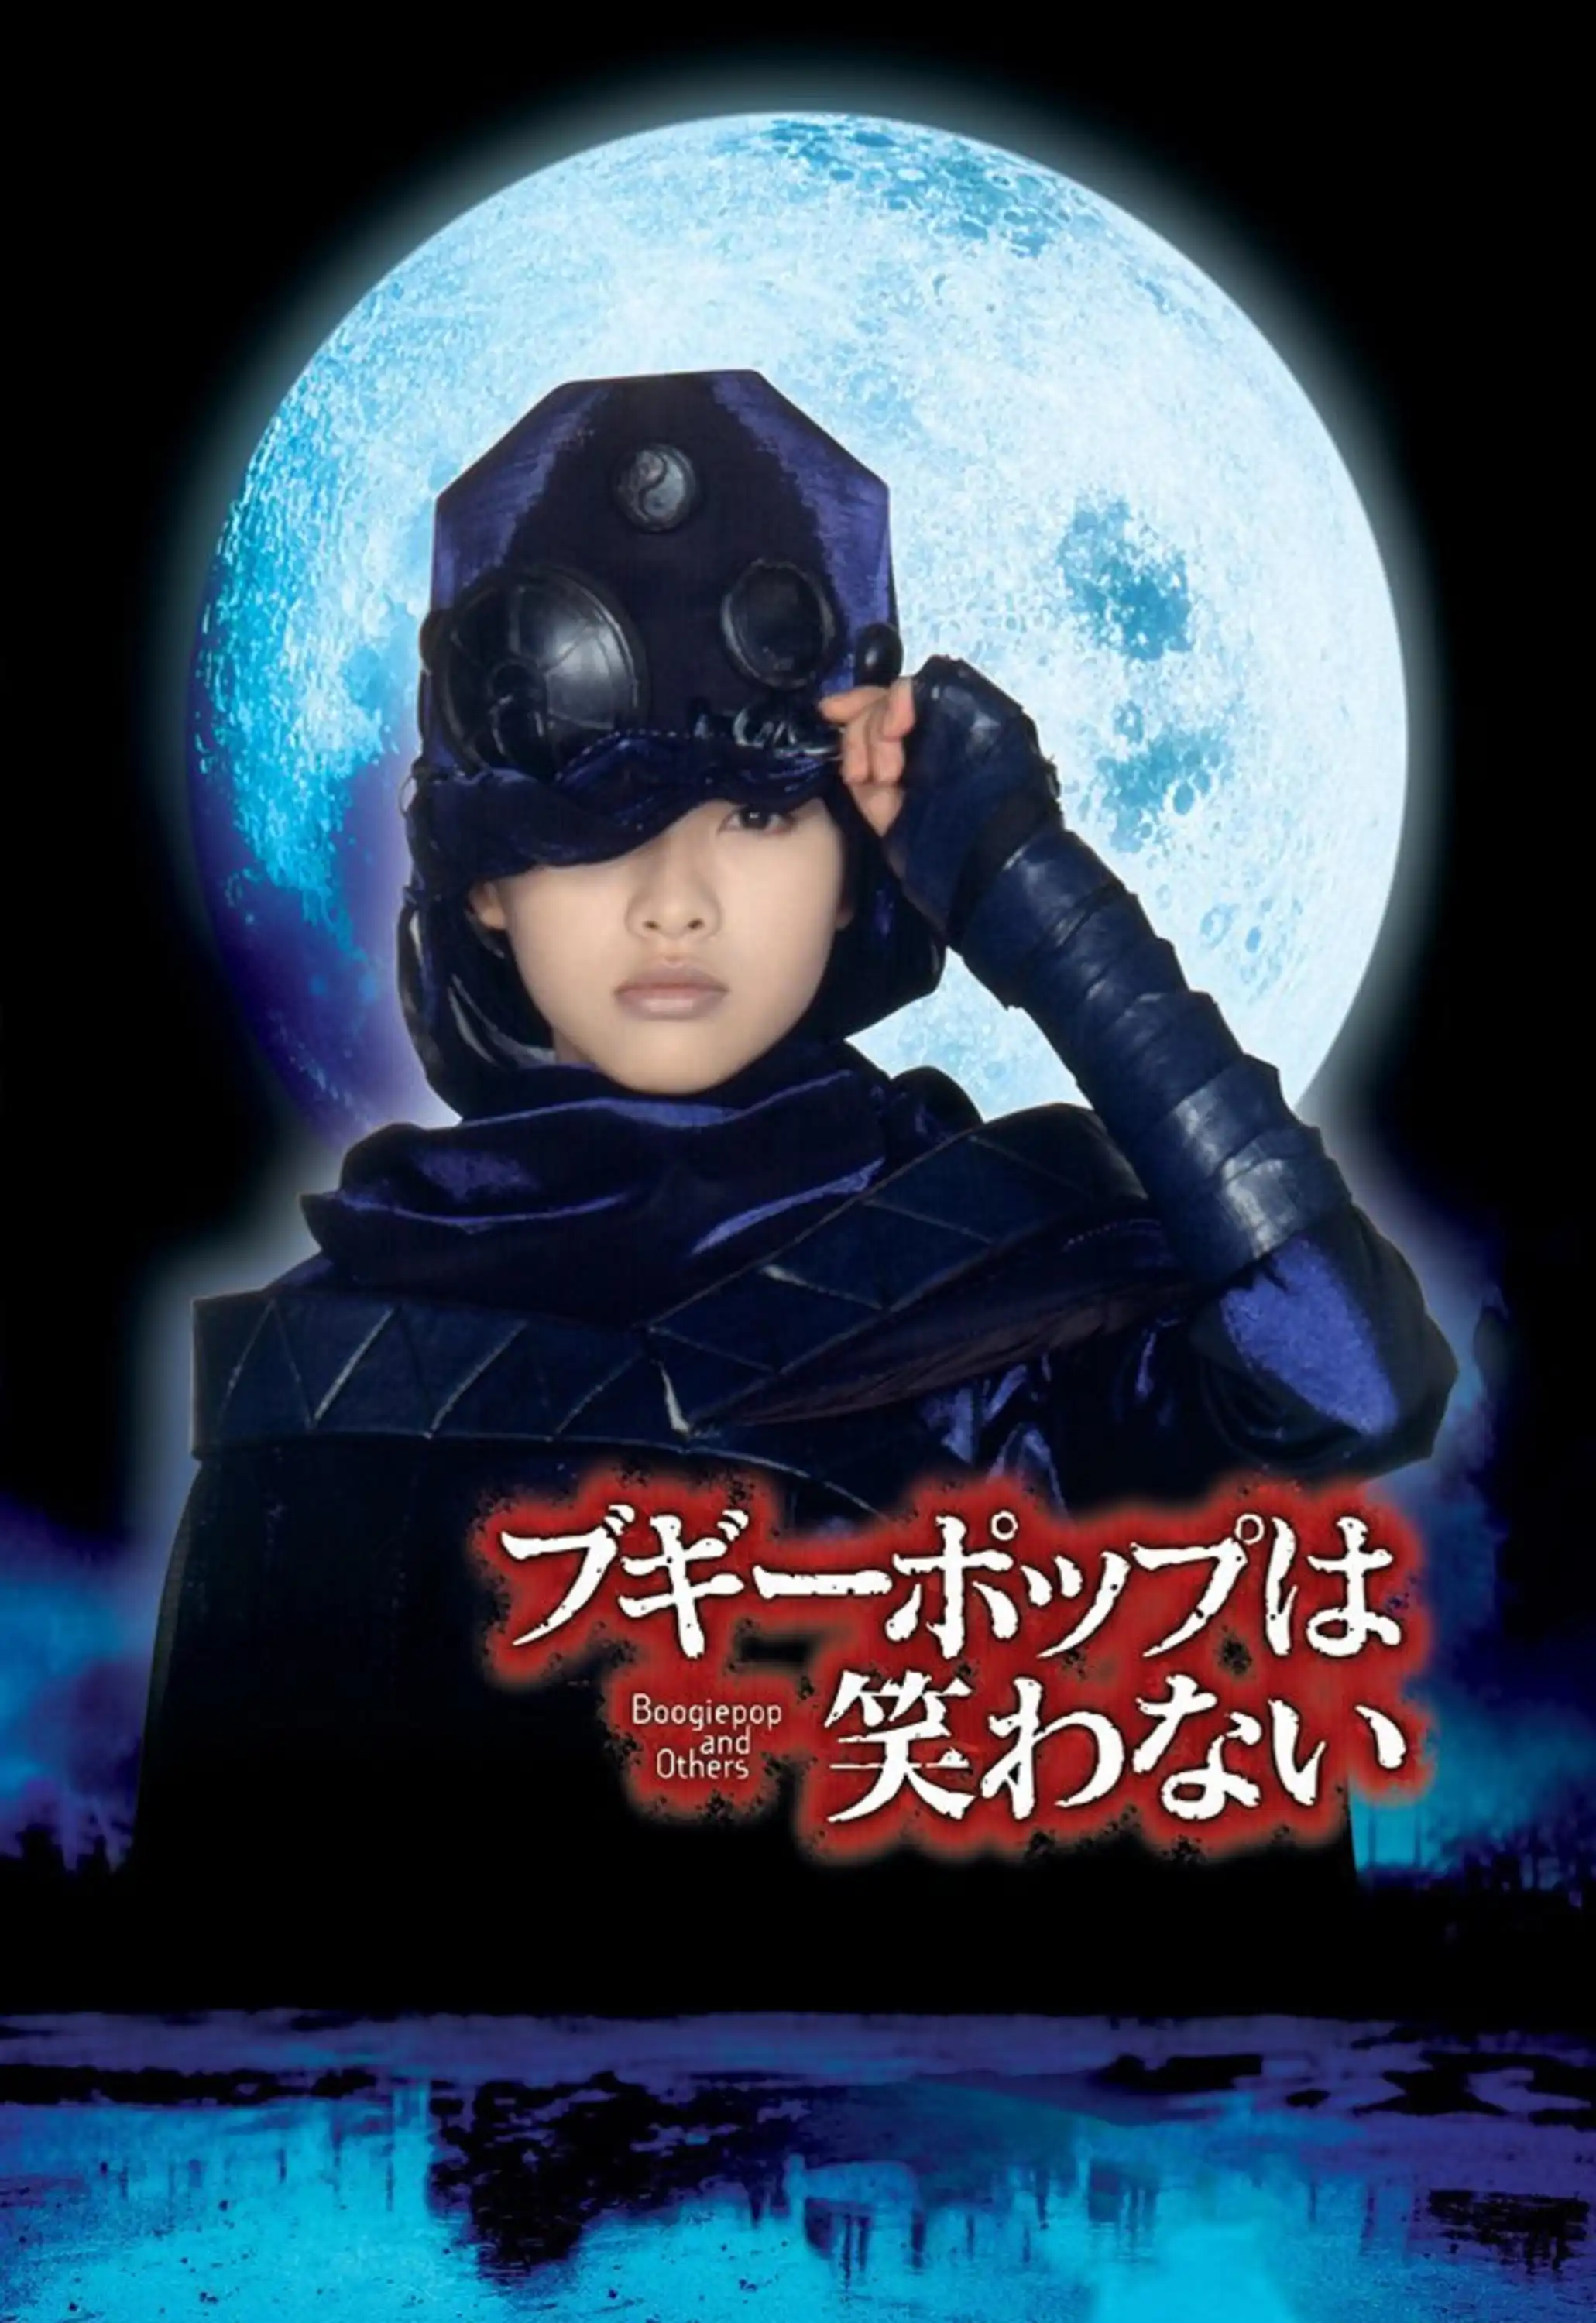 Watch and Download Boogiepop and Others 7